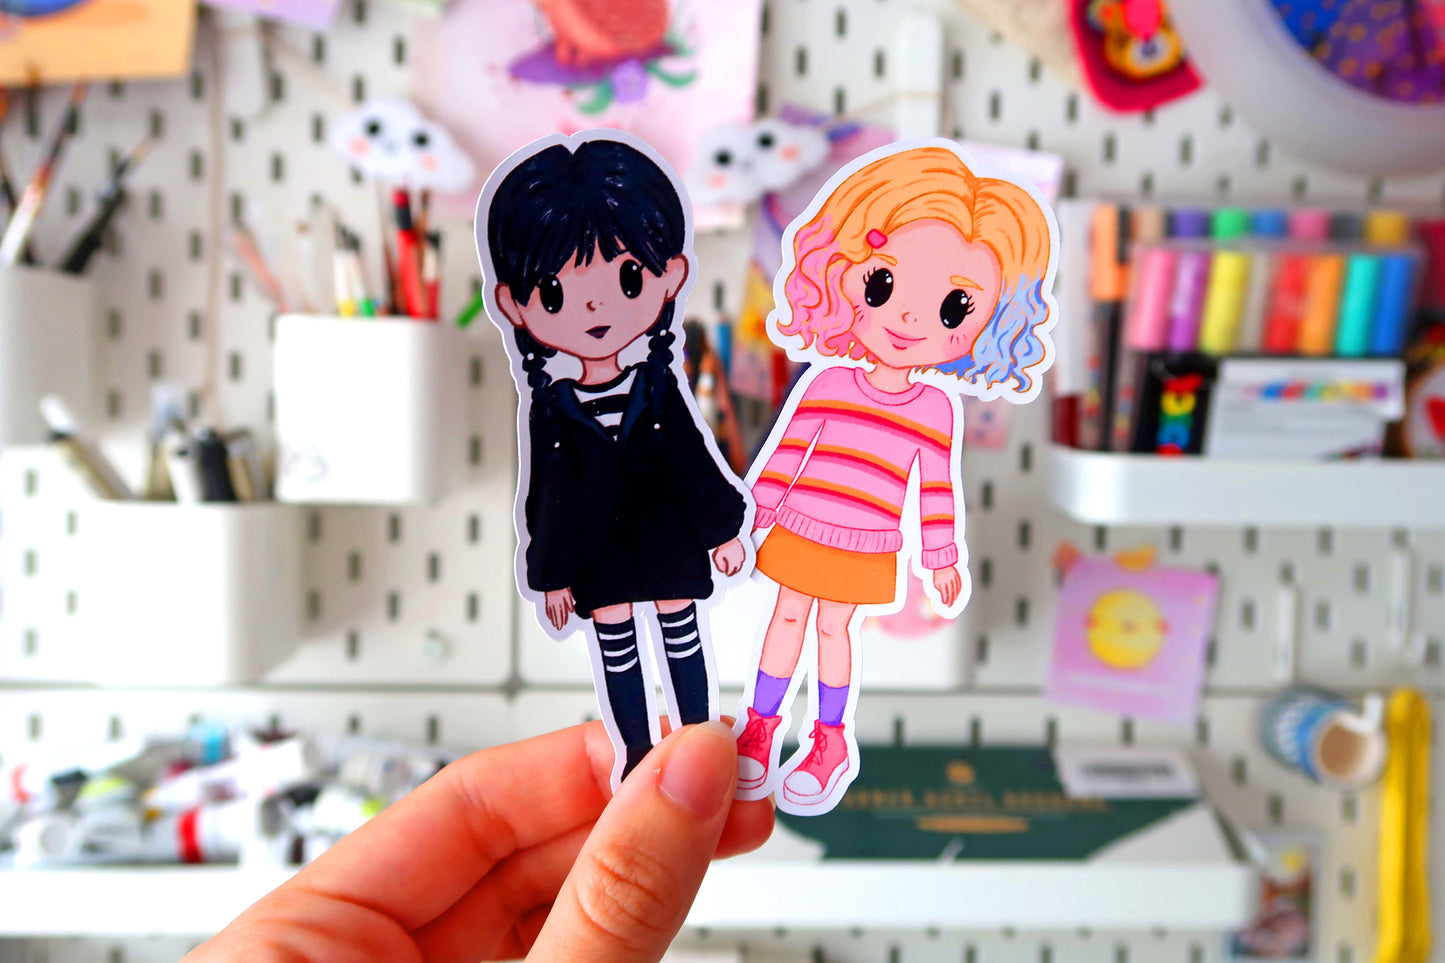 Wednesday Addams and Enid Sinclair Stickers